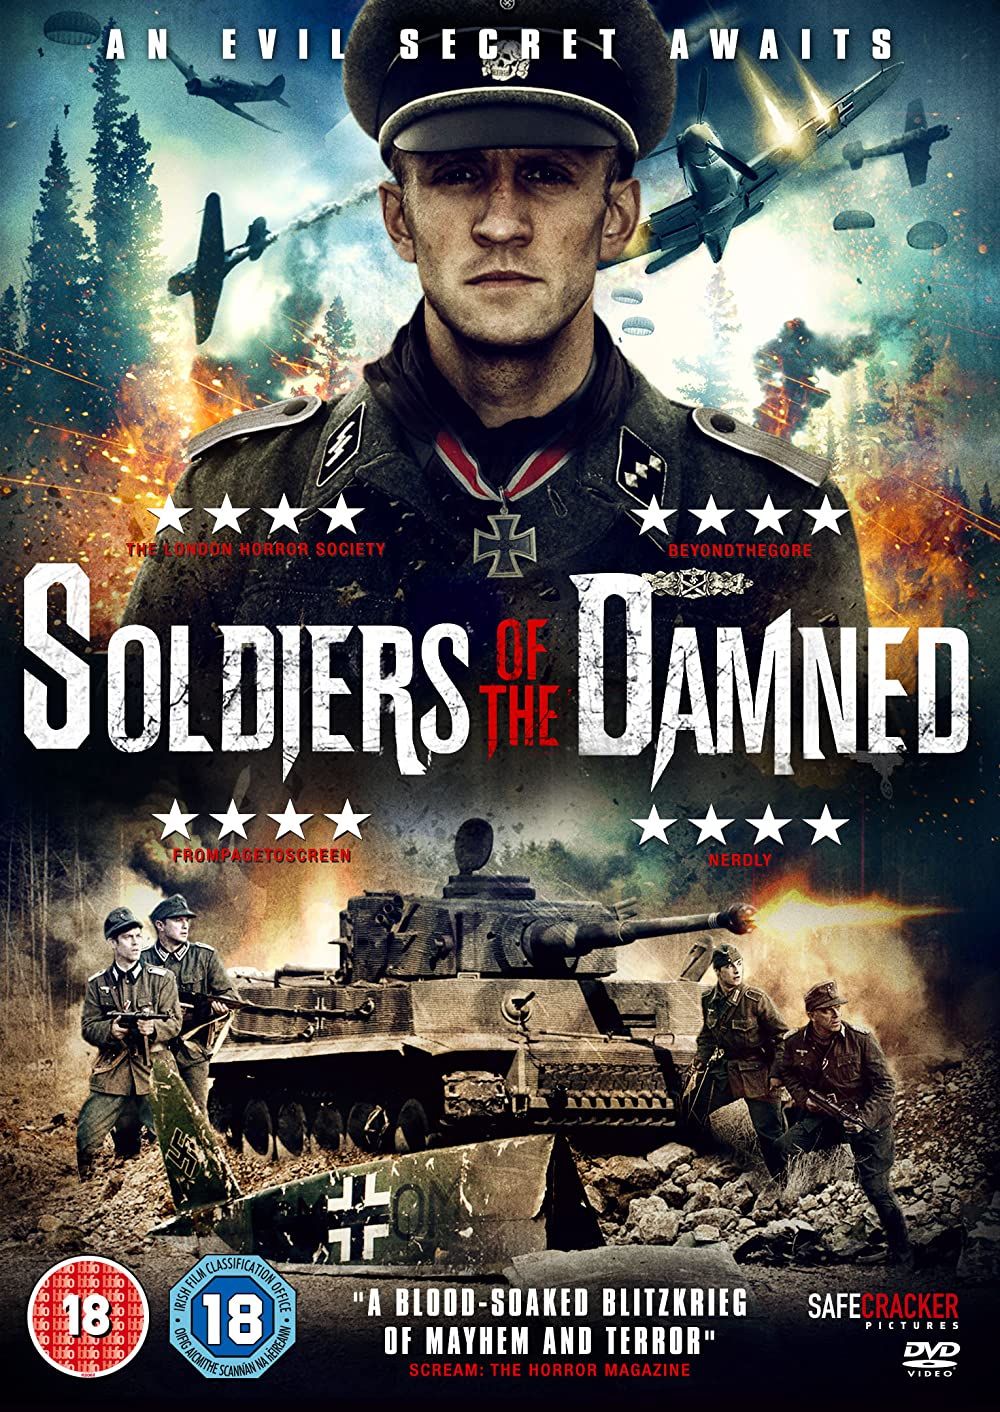 Soldiers Of The Damned (2015) Hindi Dubbed BluRay download full movie